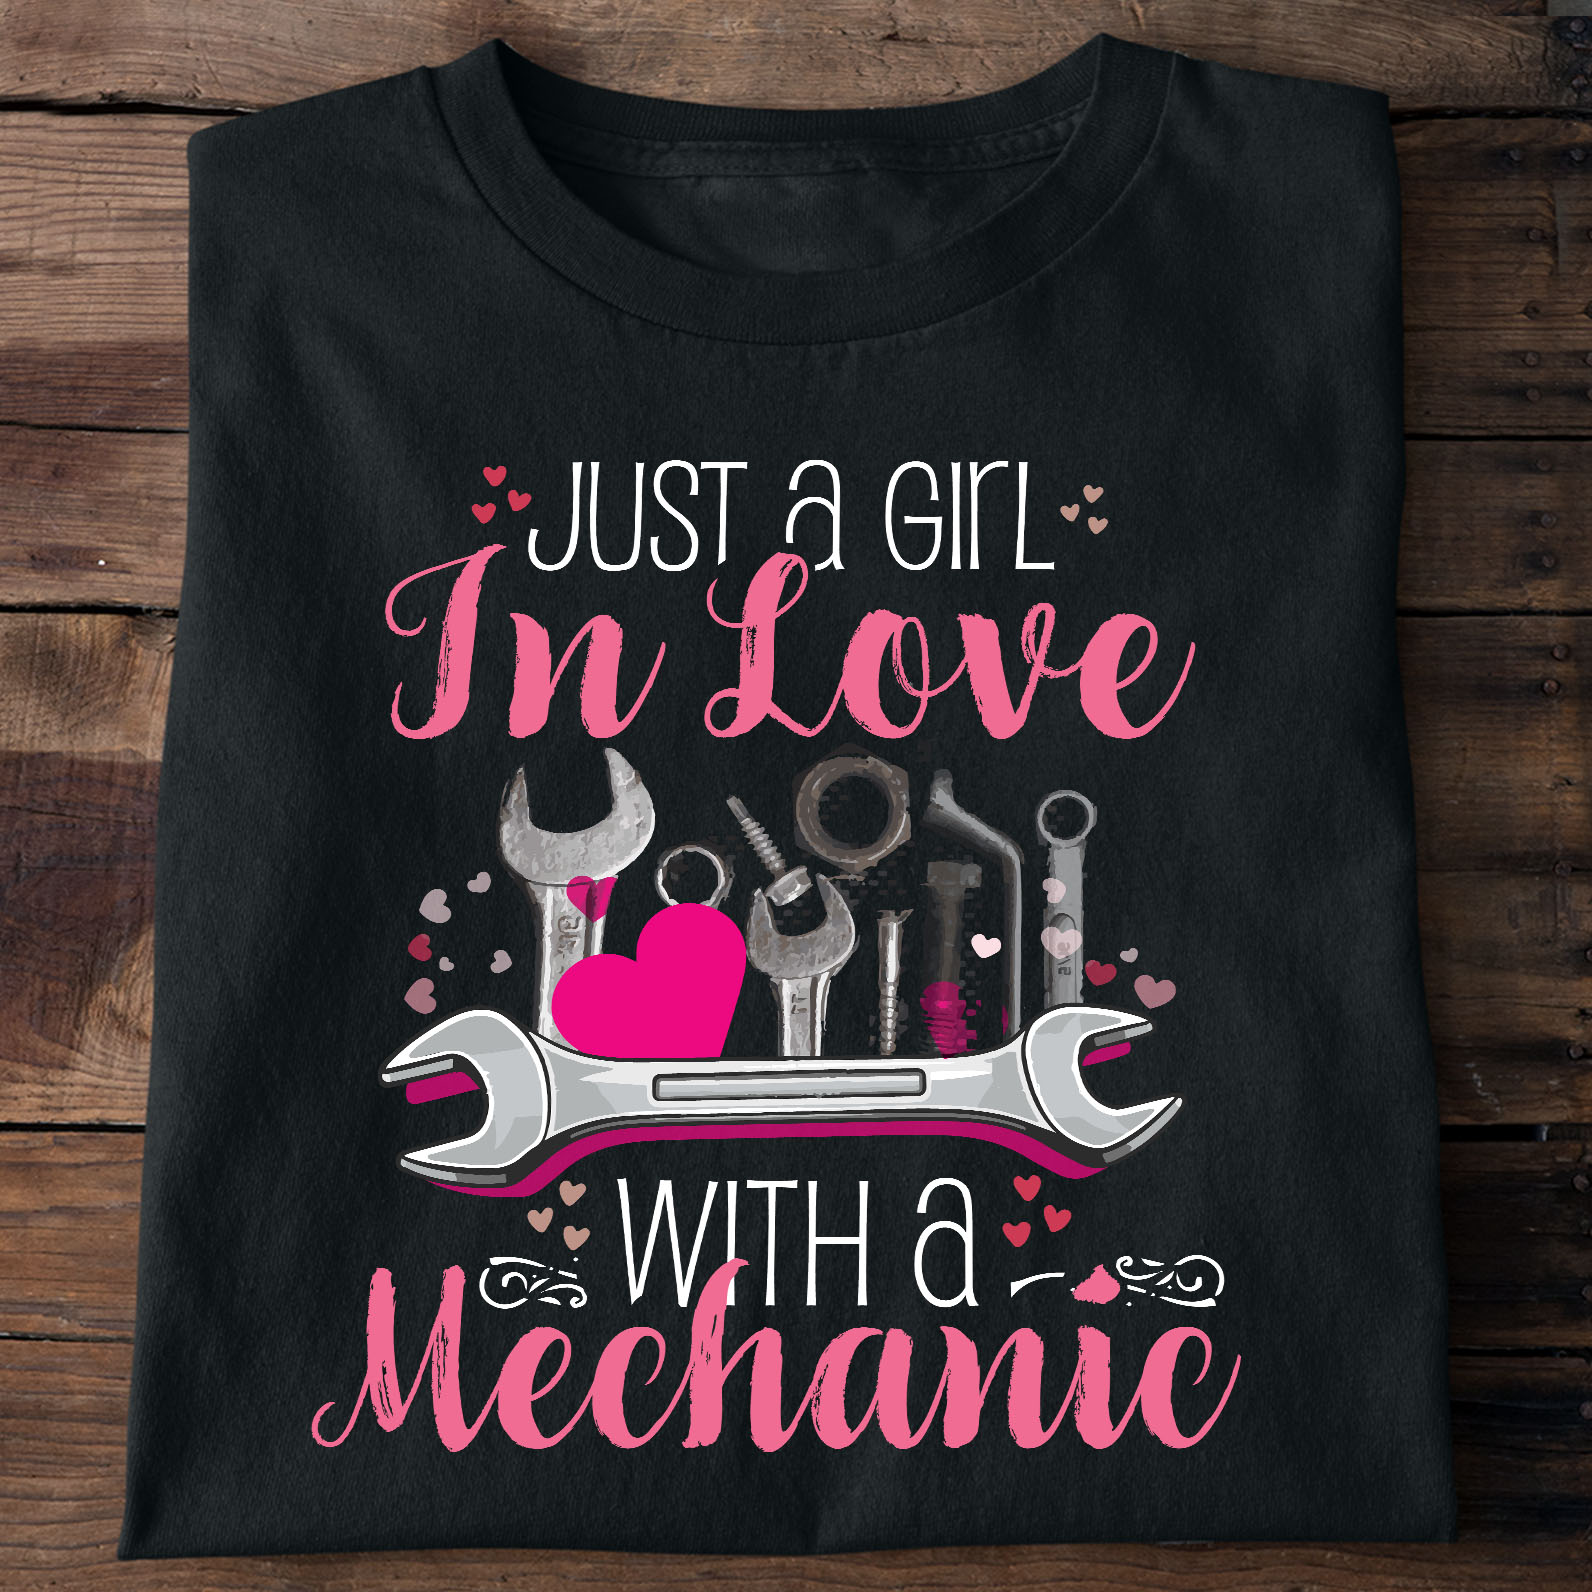 Just a girl in love with a mechanic - Mechanic the job